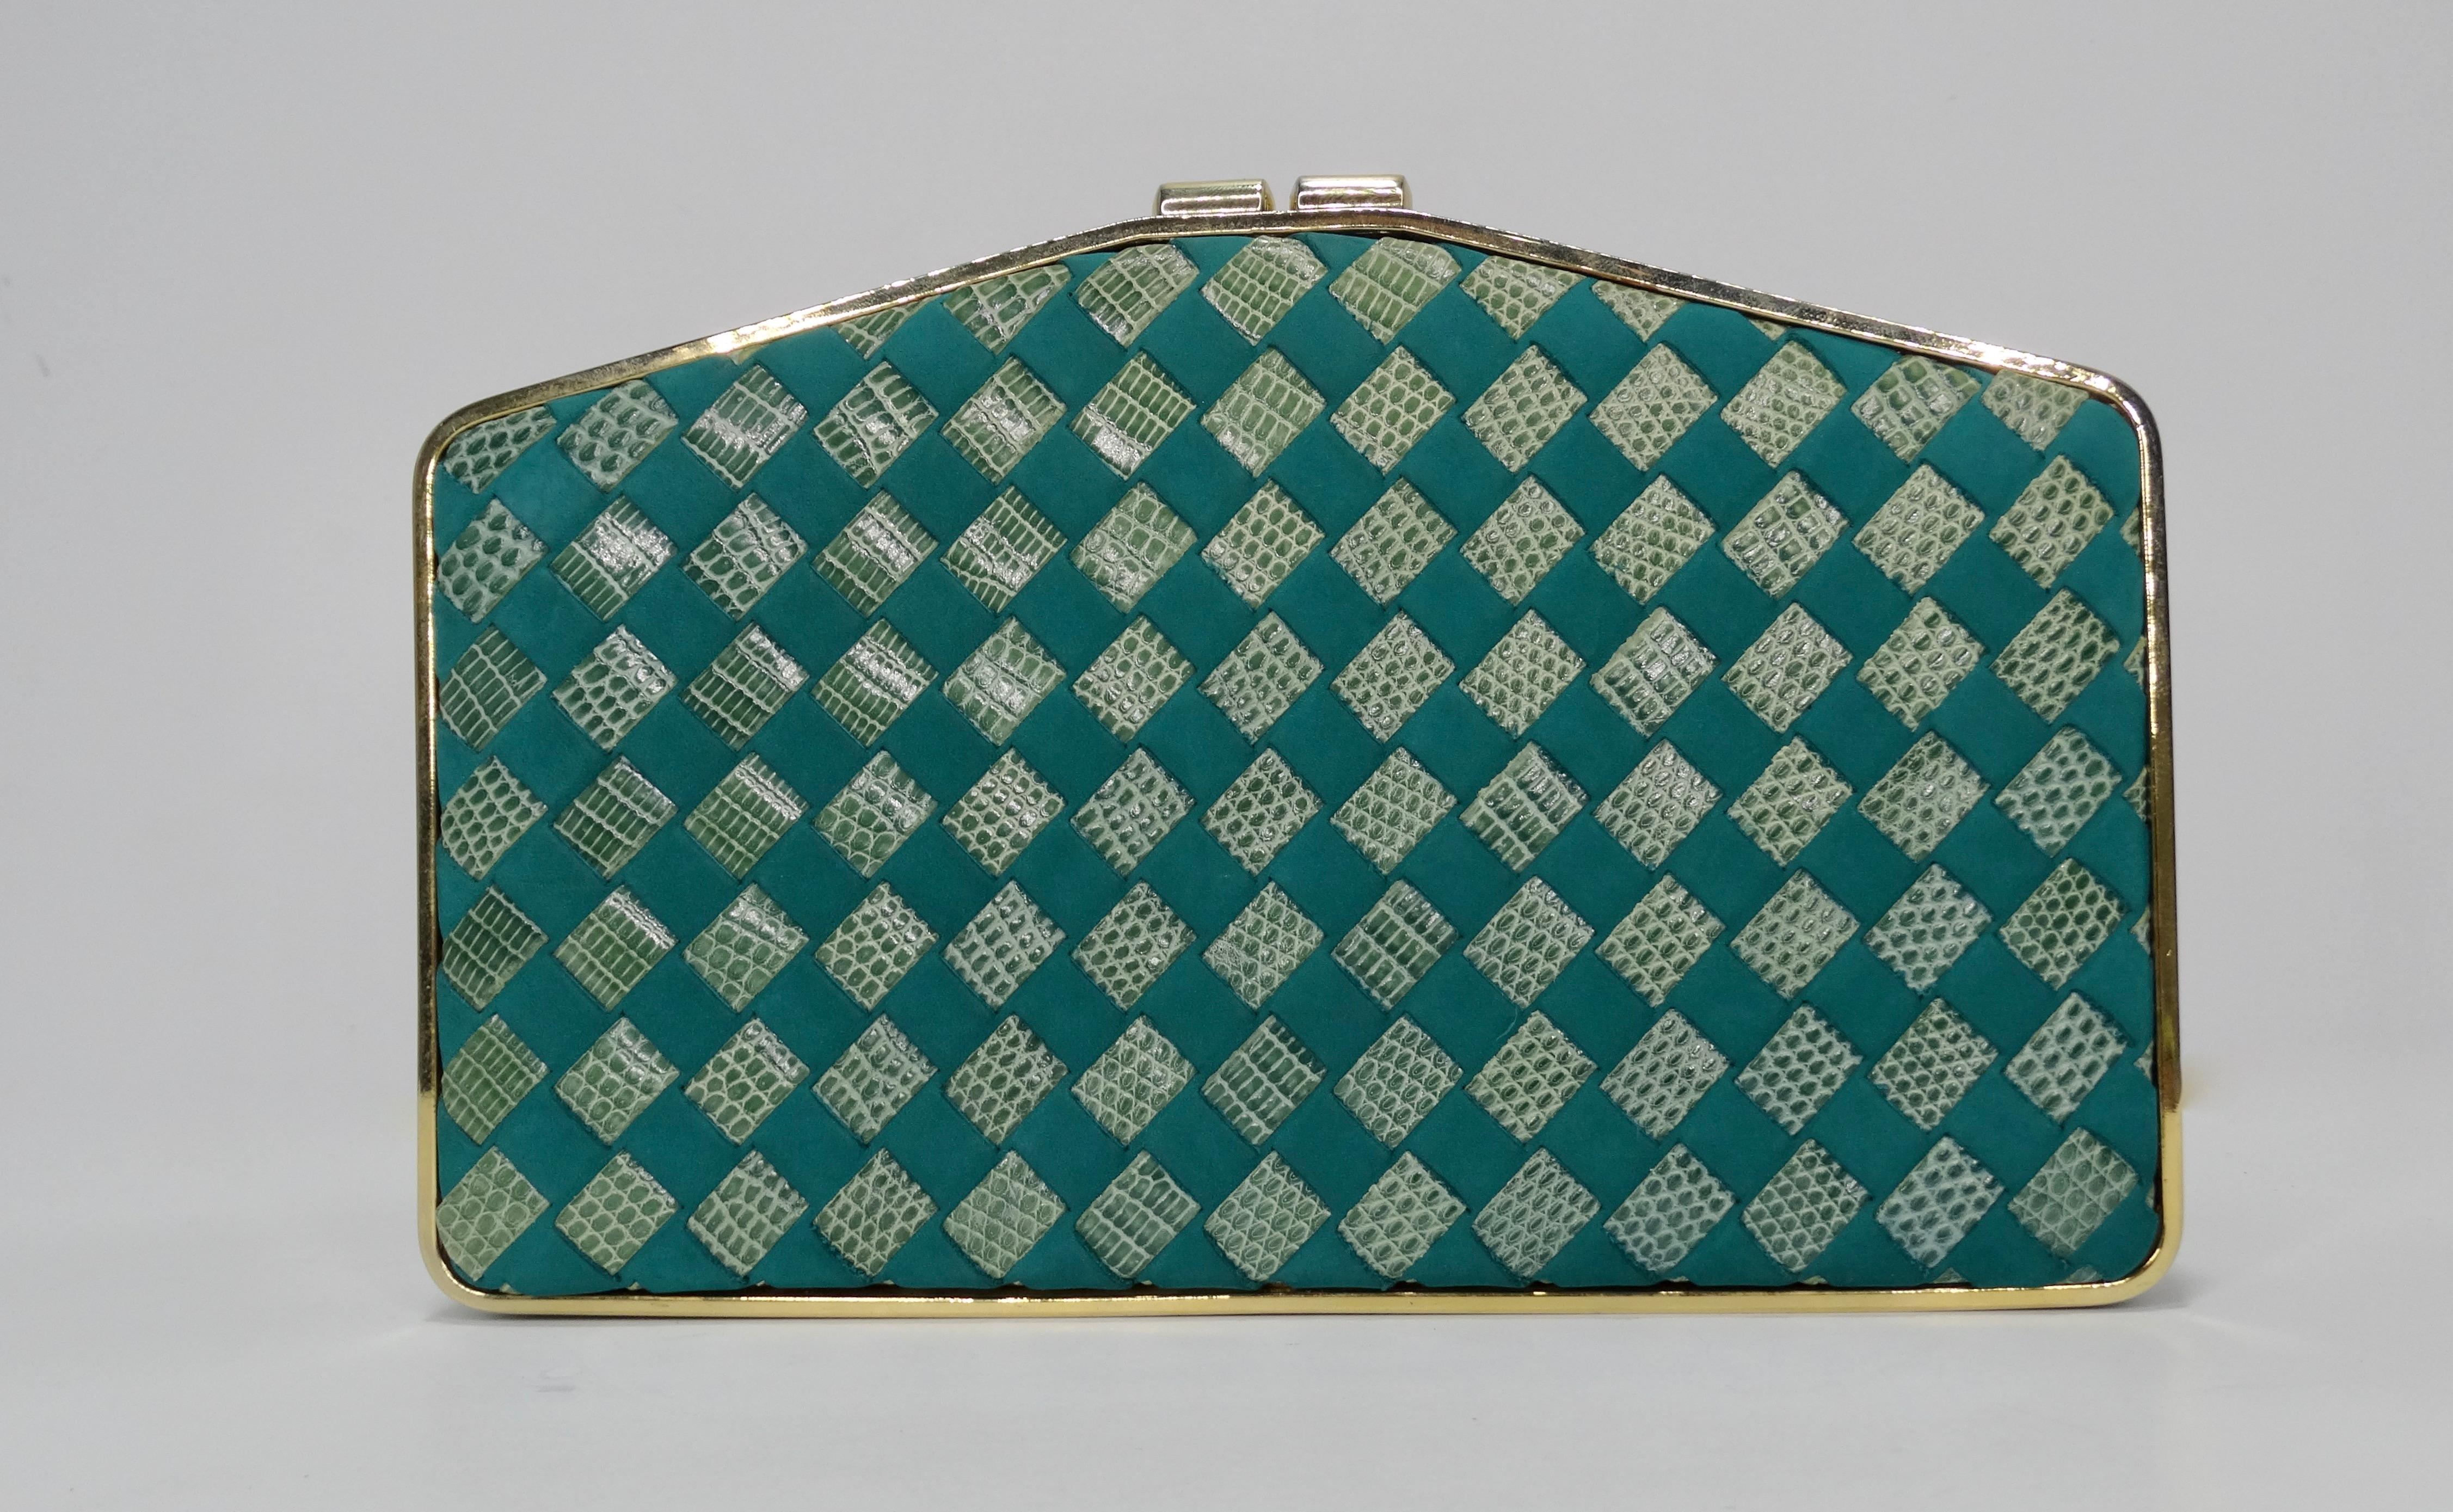 Let's talk vintage! This stunning Bottega Veneta clutch from 1988 features hues of blues and green woven lizard skin and leather. Gold hardware is featured throughout and satin emerald green is featured inside. This clutch also includes an